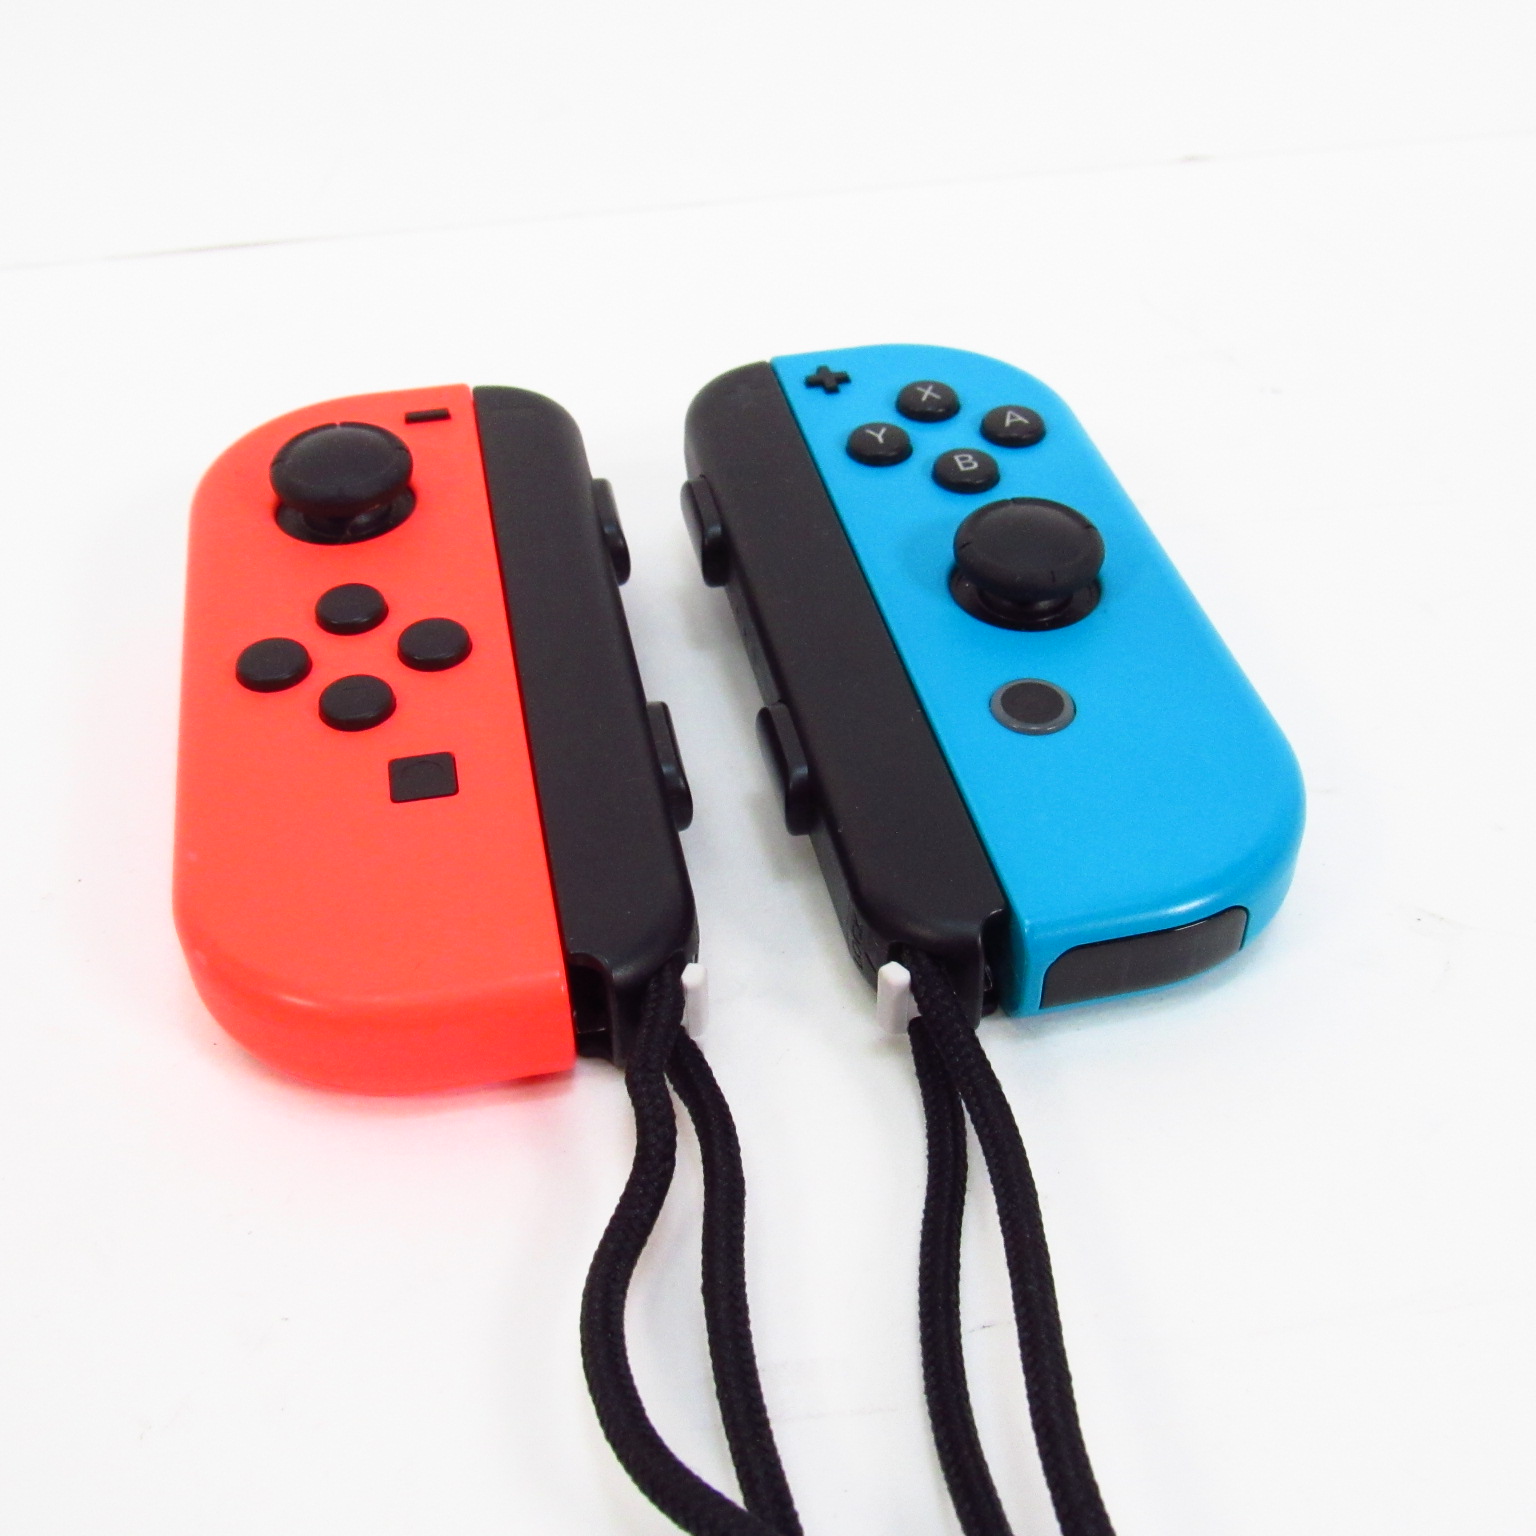 Nintendo Switch Neon Blue Red Joy-Con Controllers